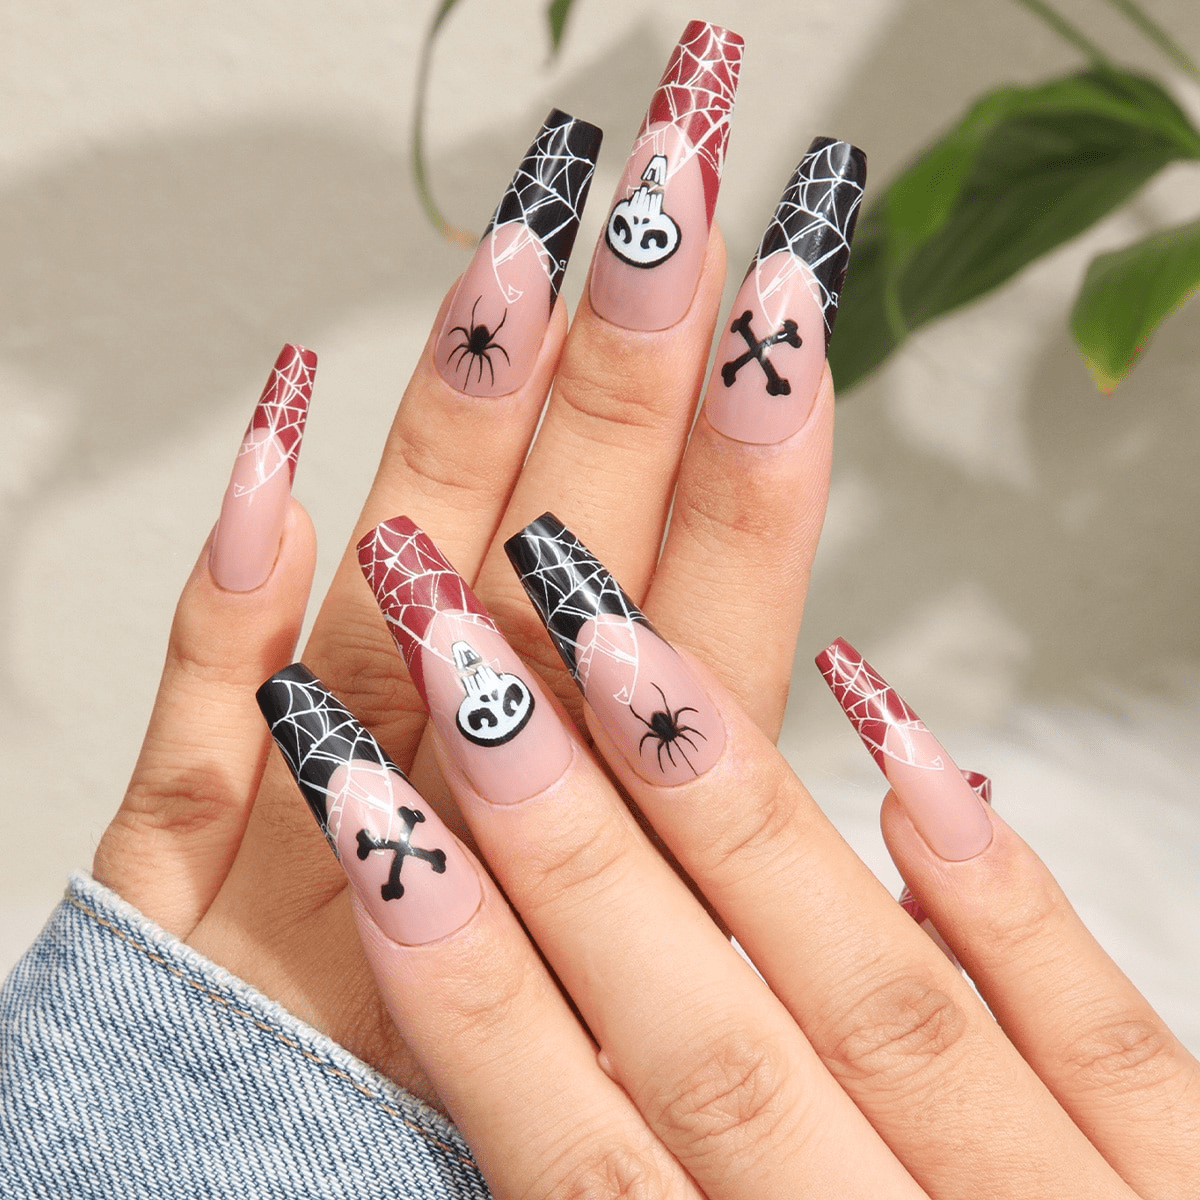 YOSOMK French Tip Long Press on Nails with Designs Black and Red Spider Web  False Fake Nails Giltter Acrylic Nails Press On Coffin Artificial Nails for  Women Stick on Nails With Glue